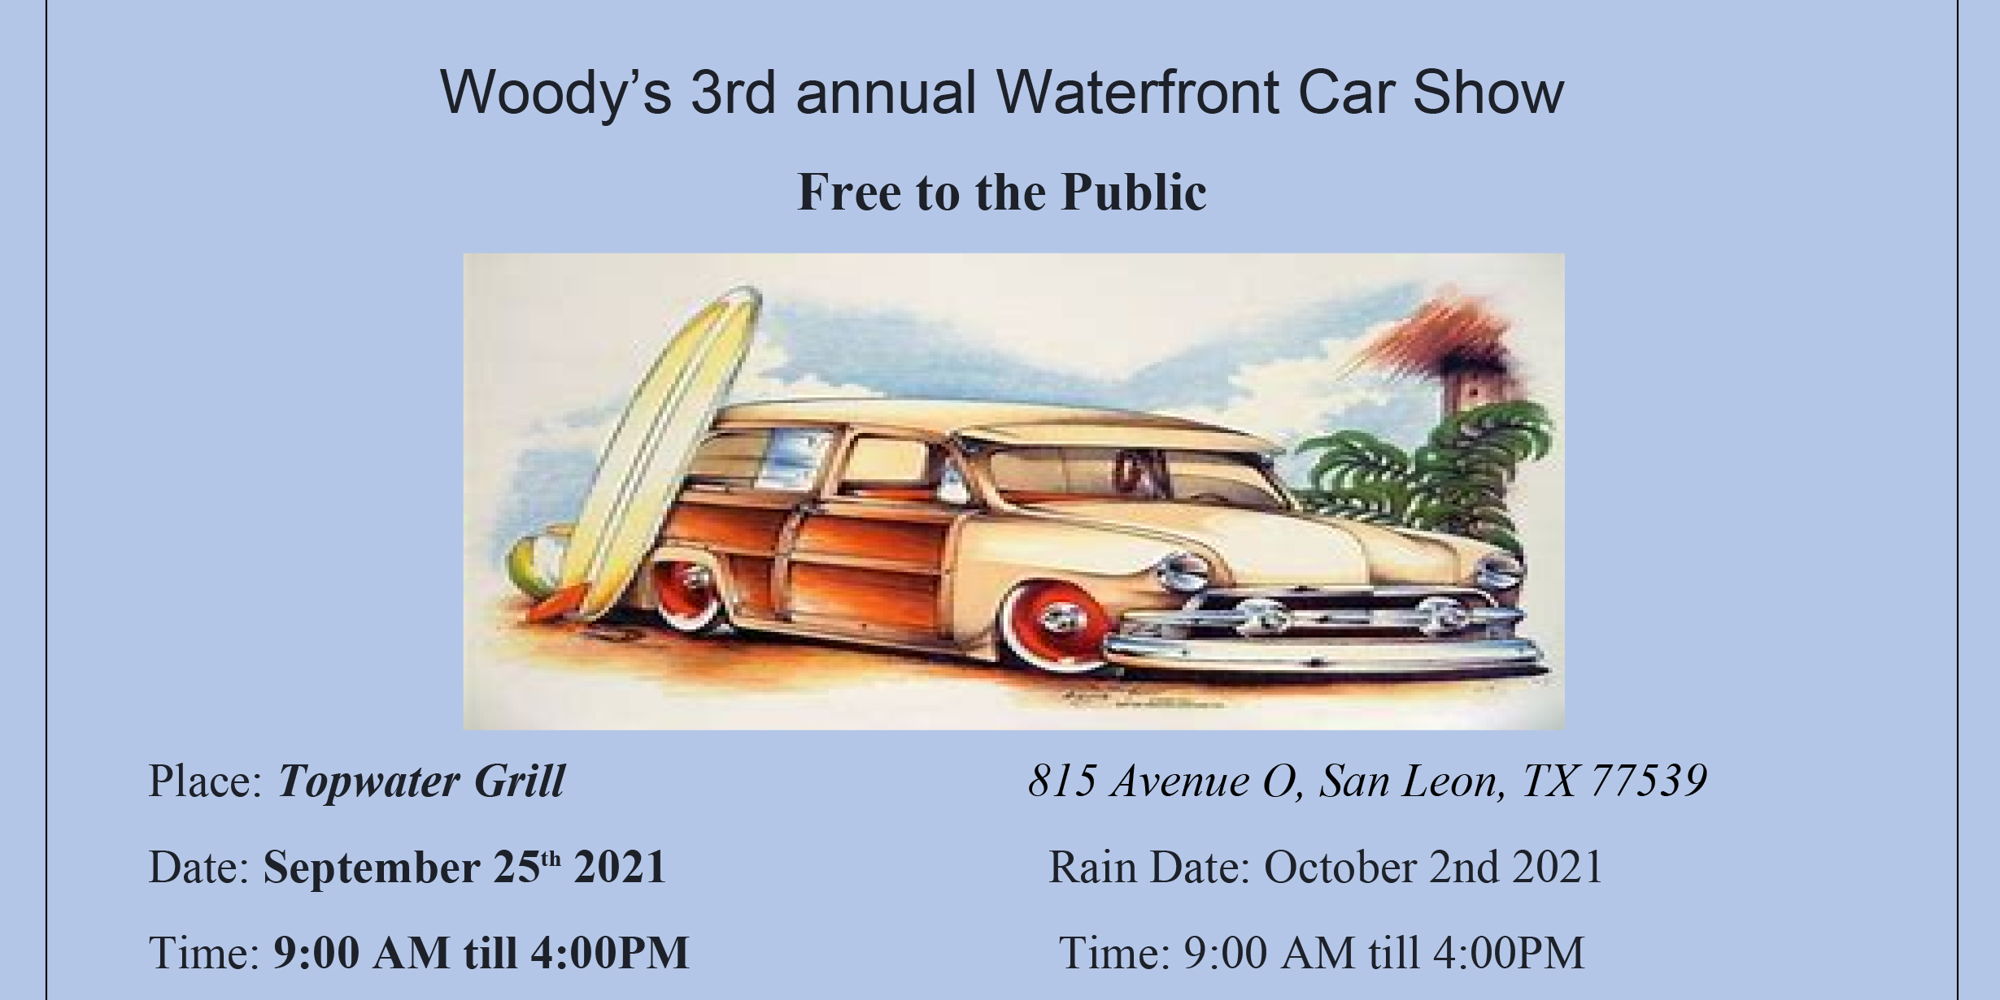 Woody’s 3rd annual Waterfront Car Show promotional image